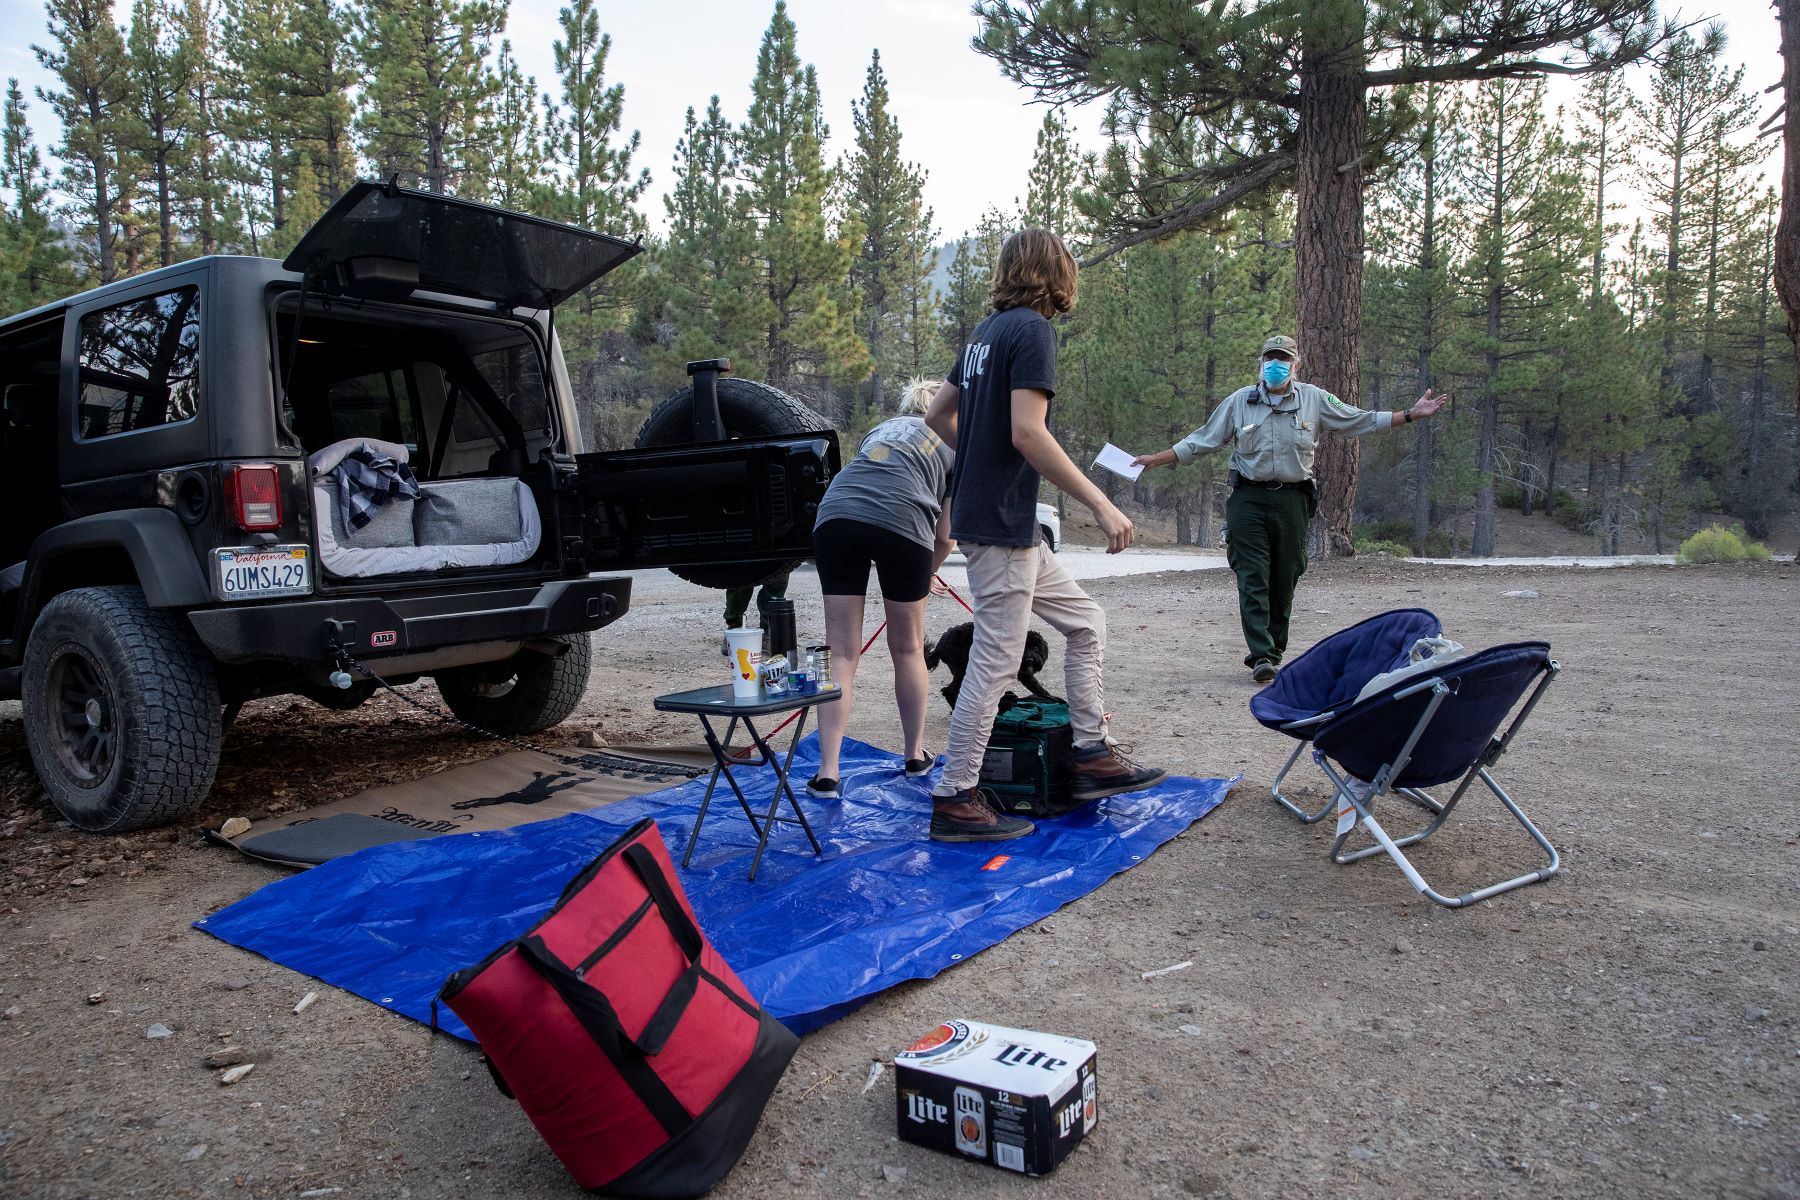 Campers breaking 'Leave no Trace' principles and rules with illegal camping in Holcomb Valley, California